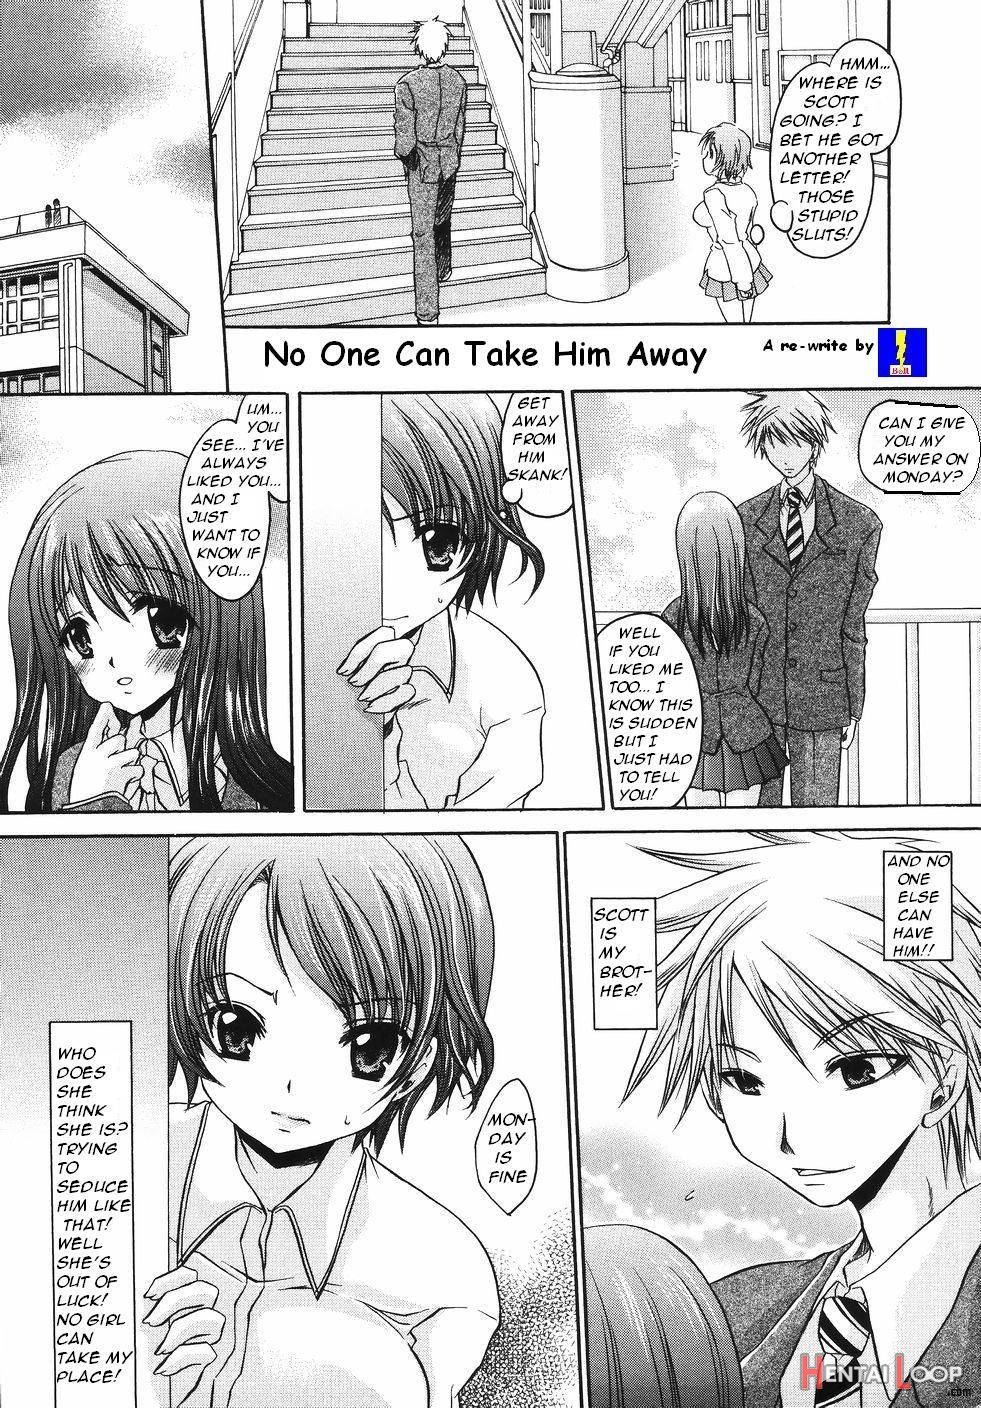 No One Can Take Him Away page 2